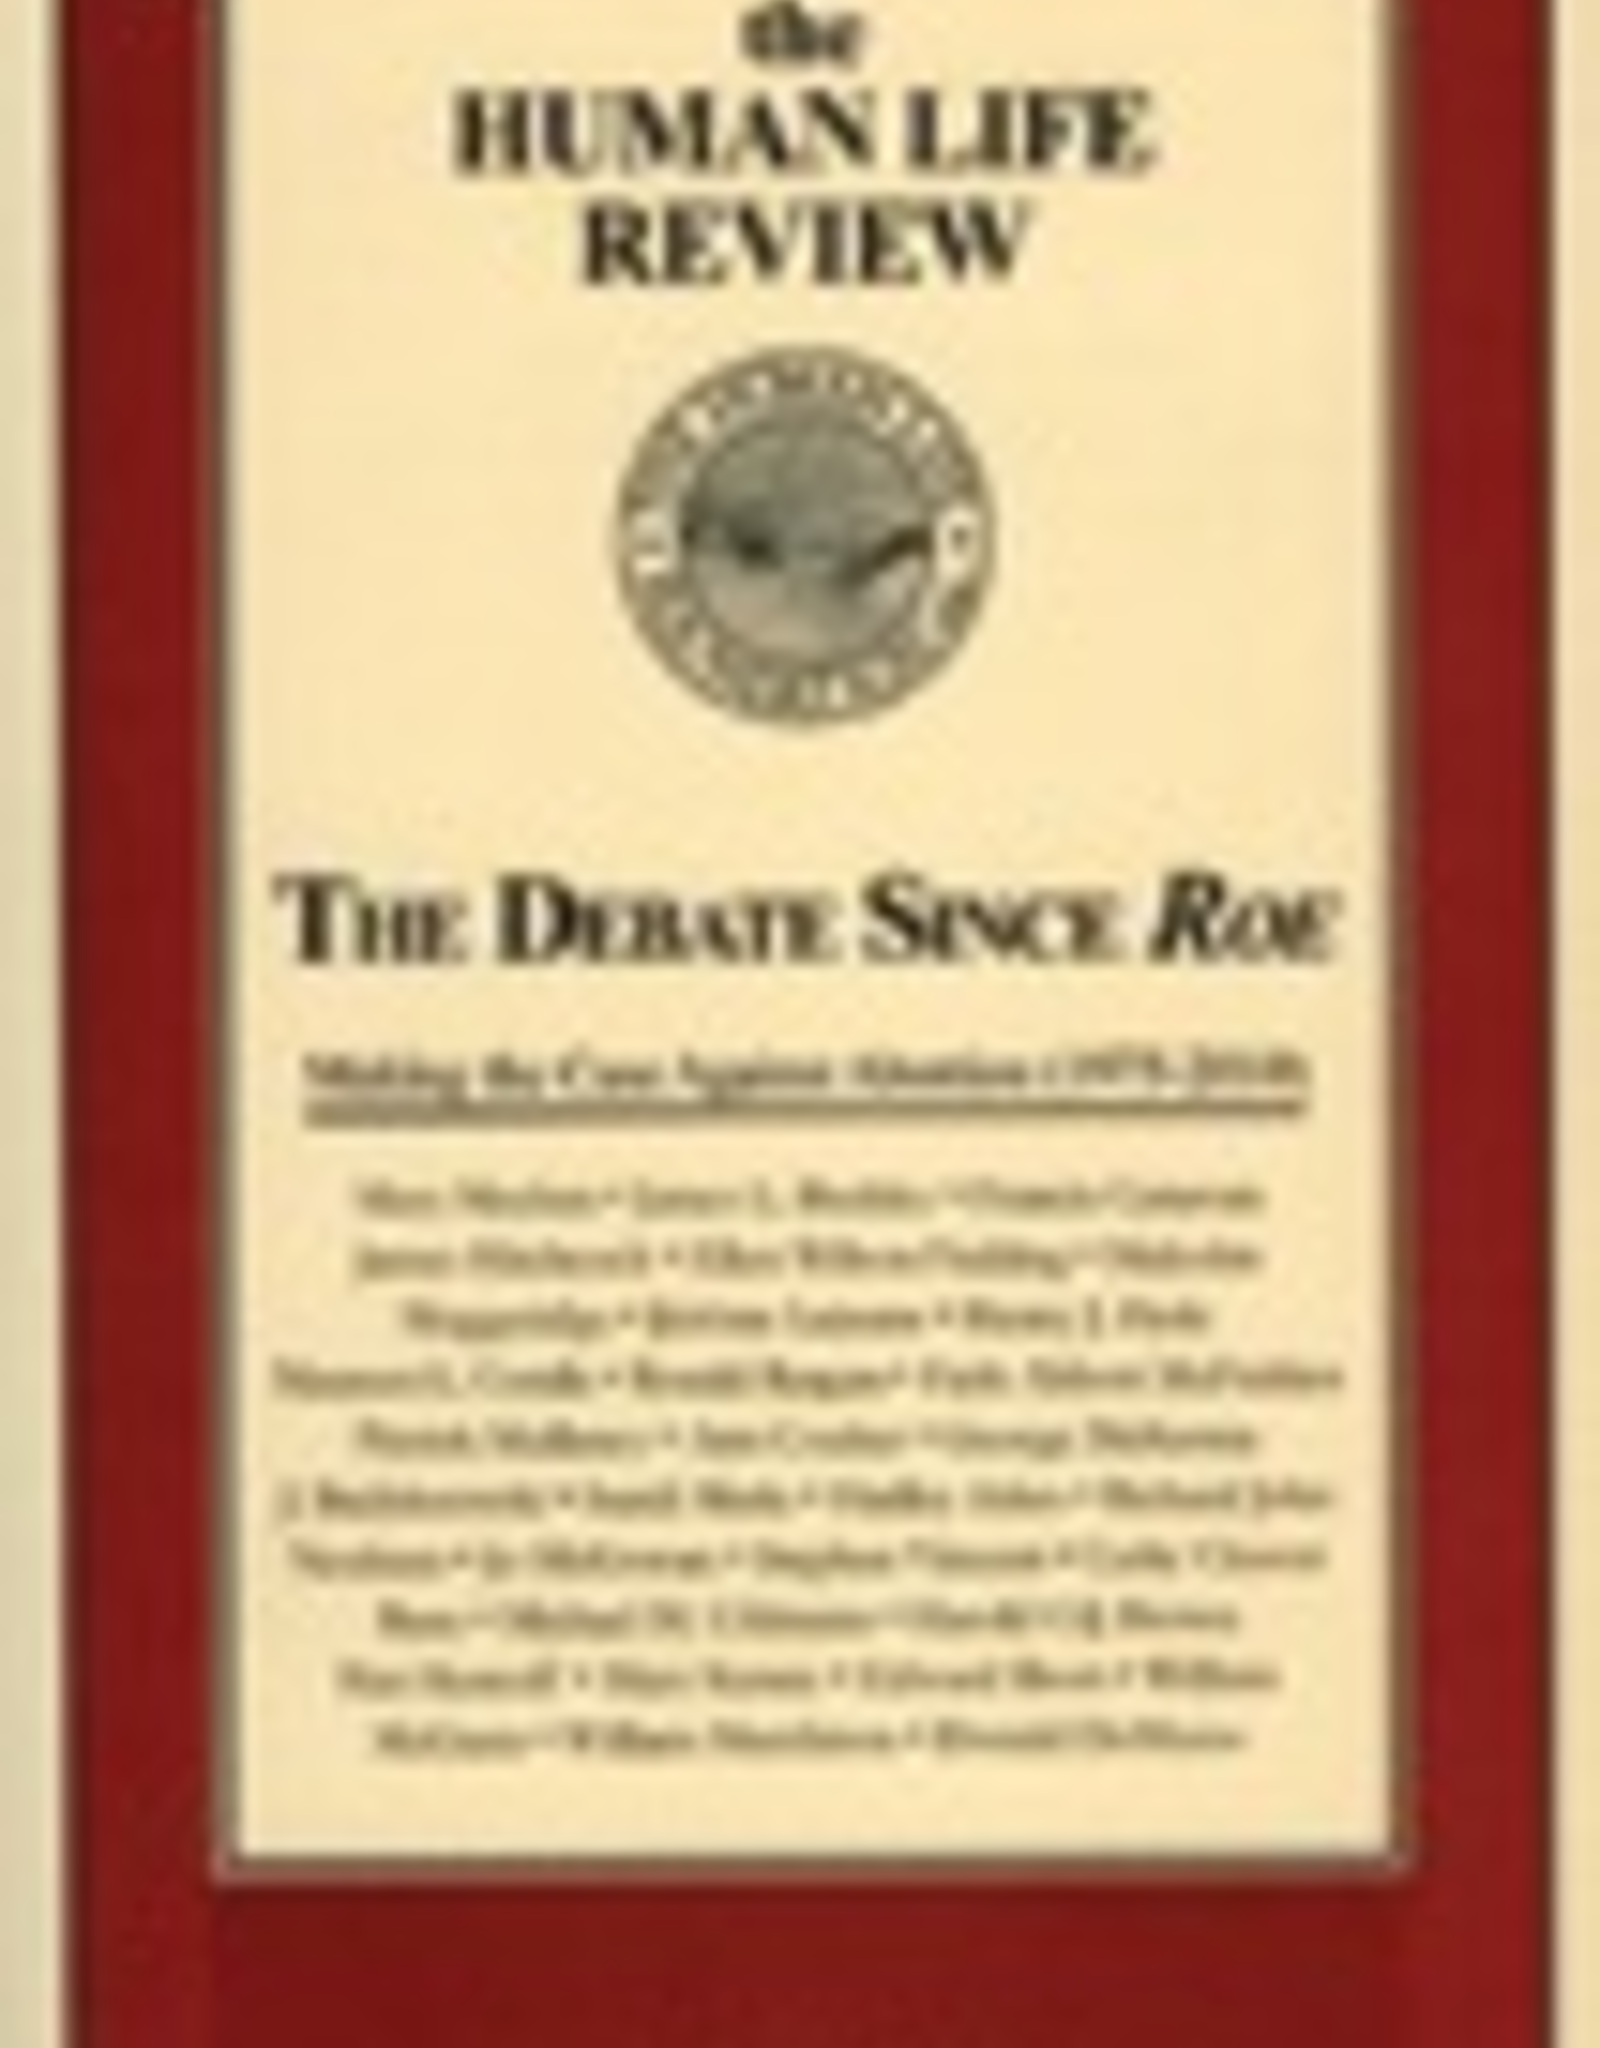 Ignatius Press The Debate Since Roe:  Making the Case Against Abortion (1975-2010), edited by Anne Conlon (paperback)